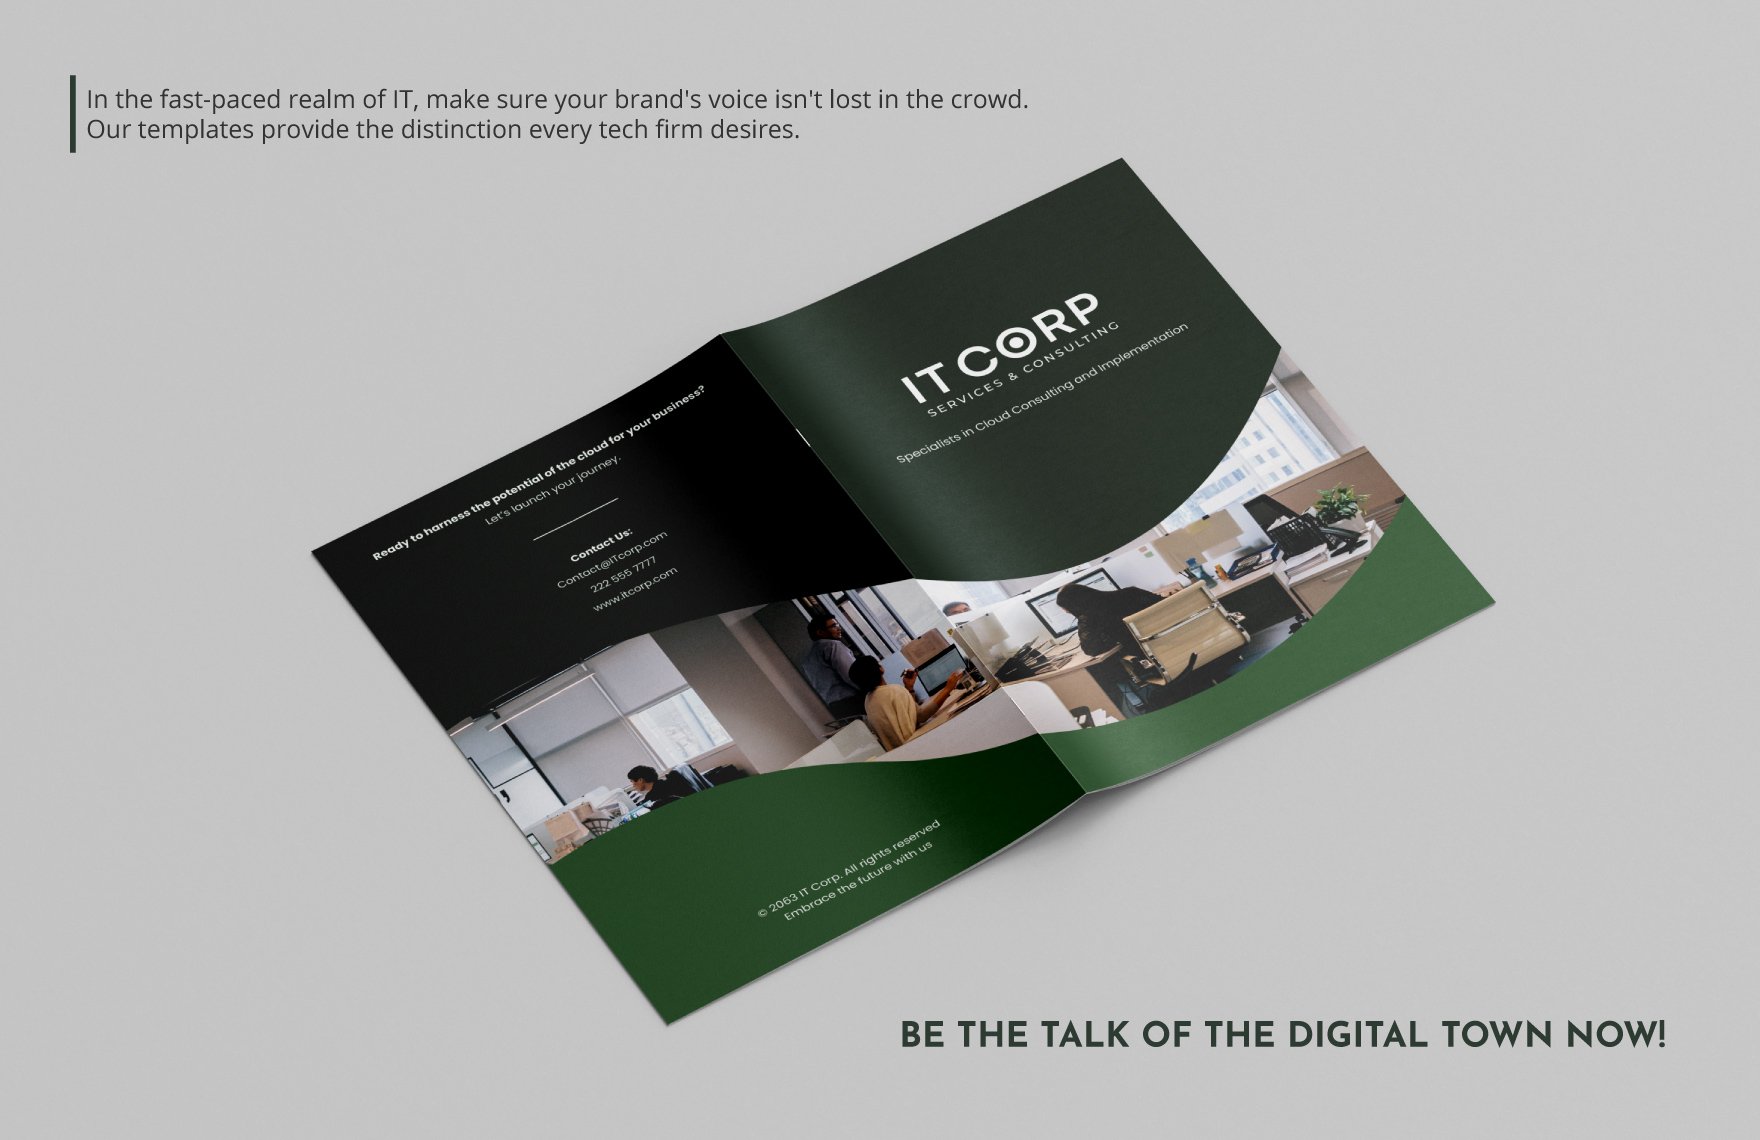 IT Cloud Consulting & Implementation Company Profile Digital Brochure Template